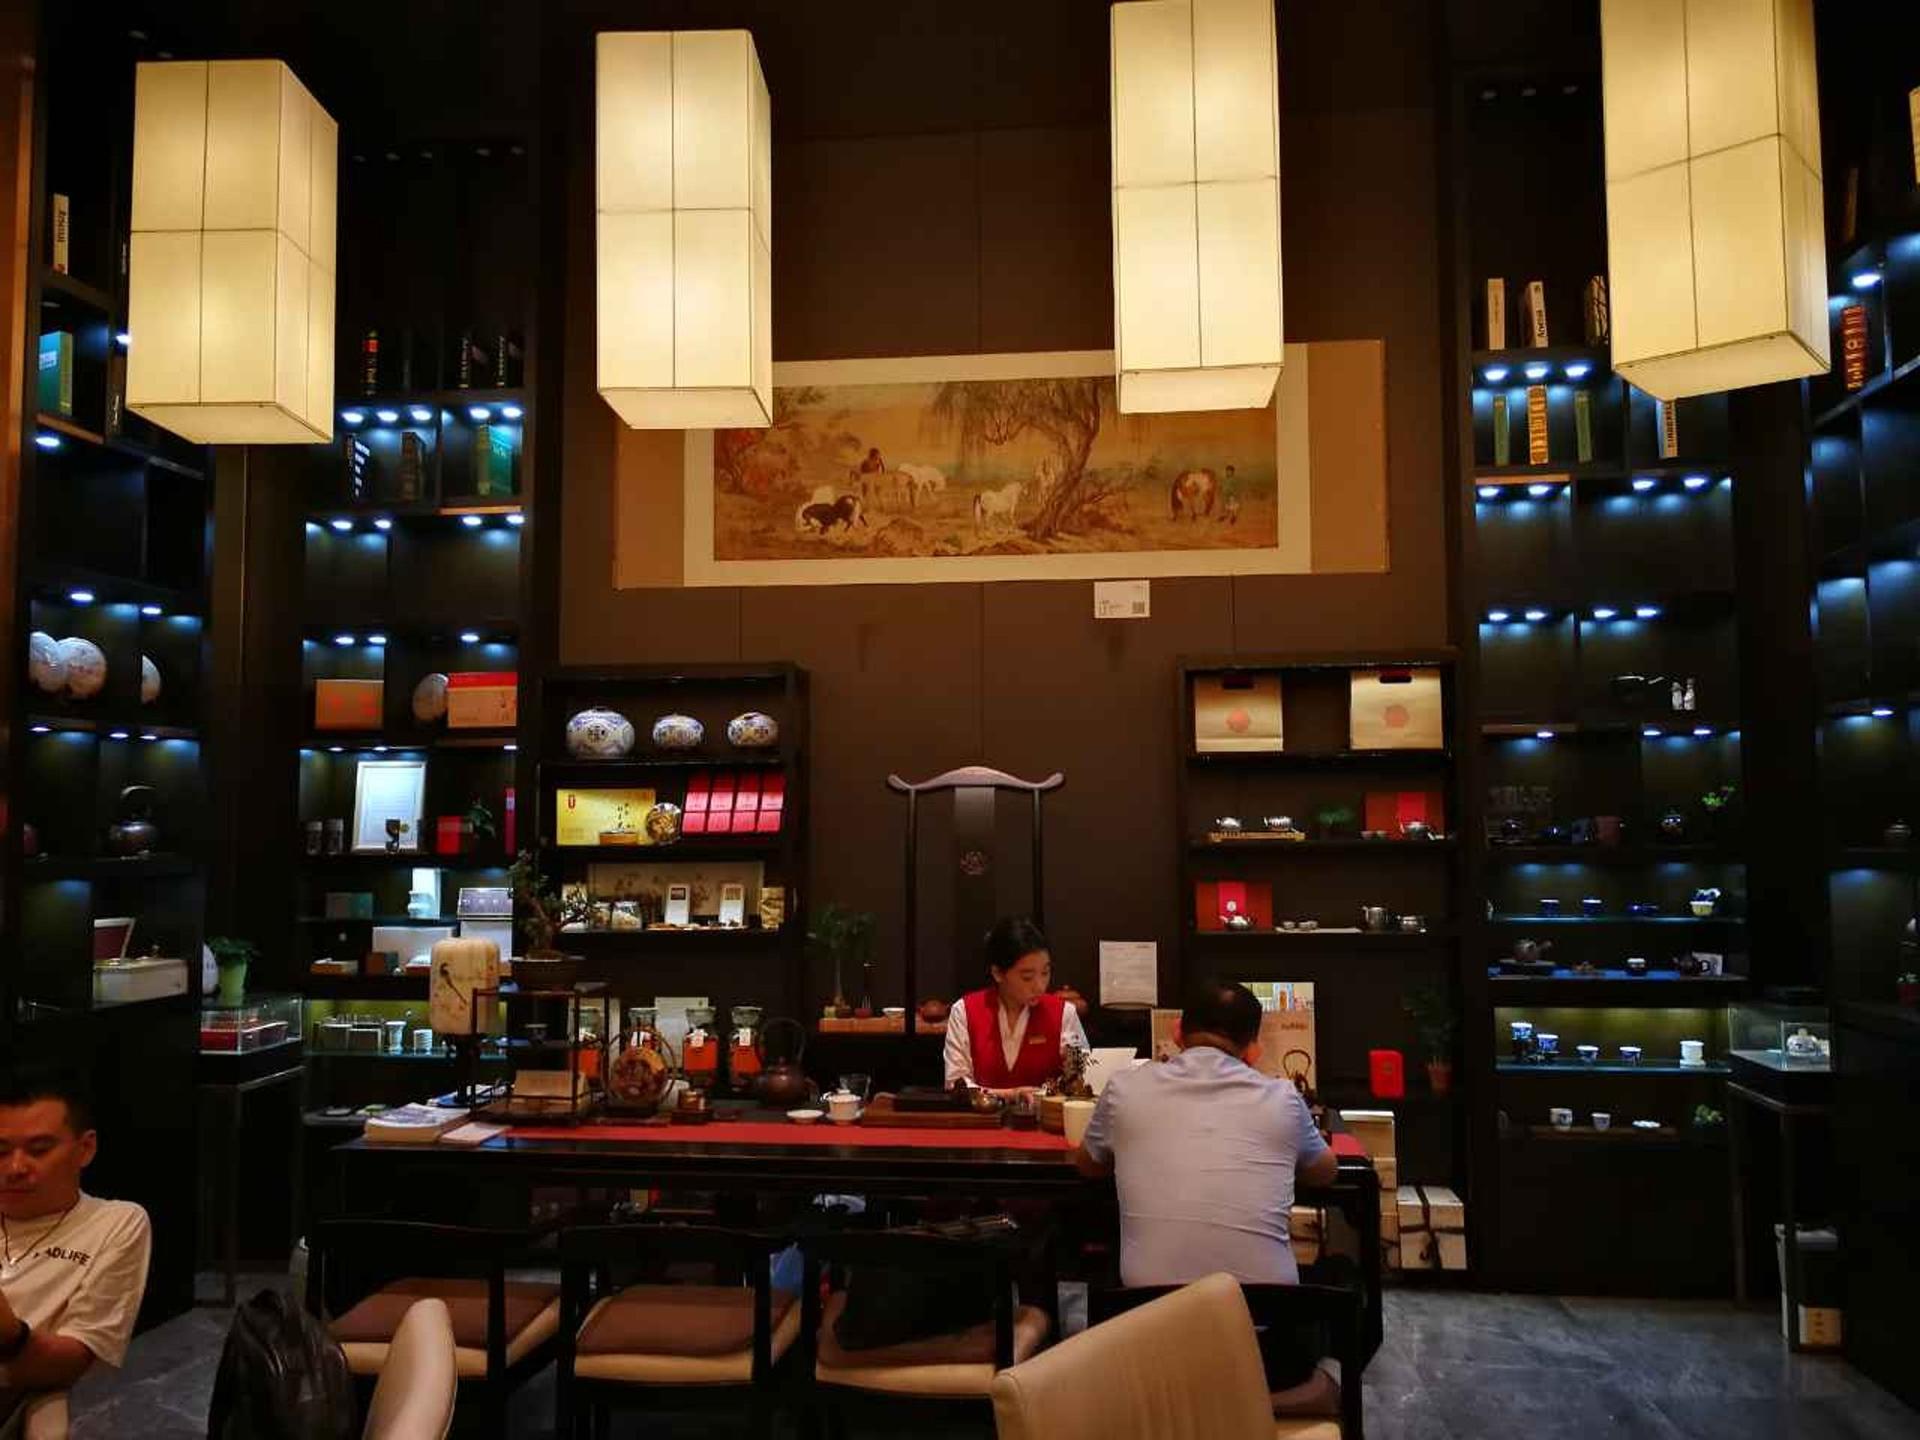 Shenzhen Airlines King Lounge image 2 of 2